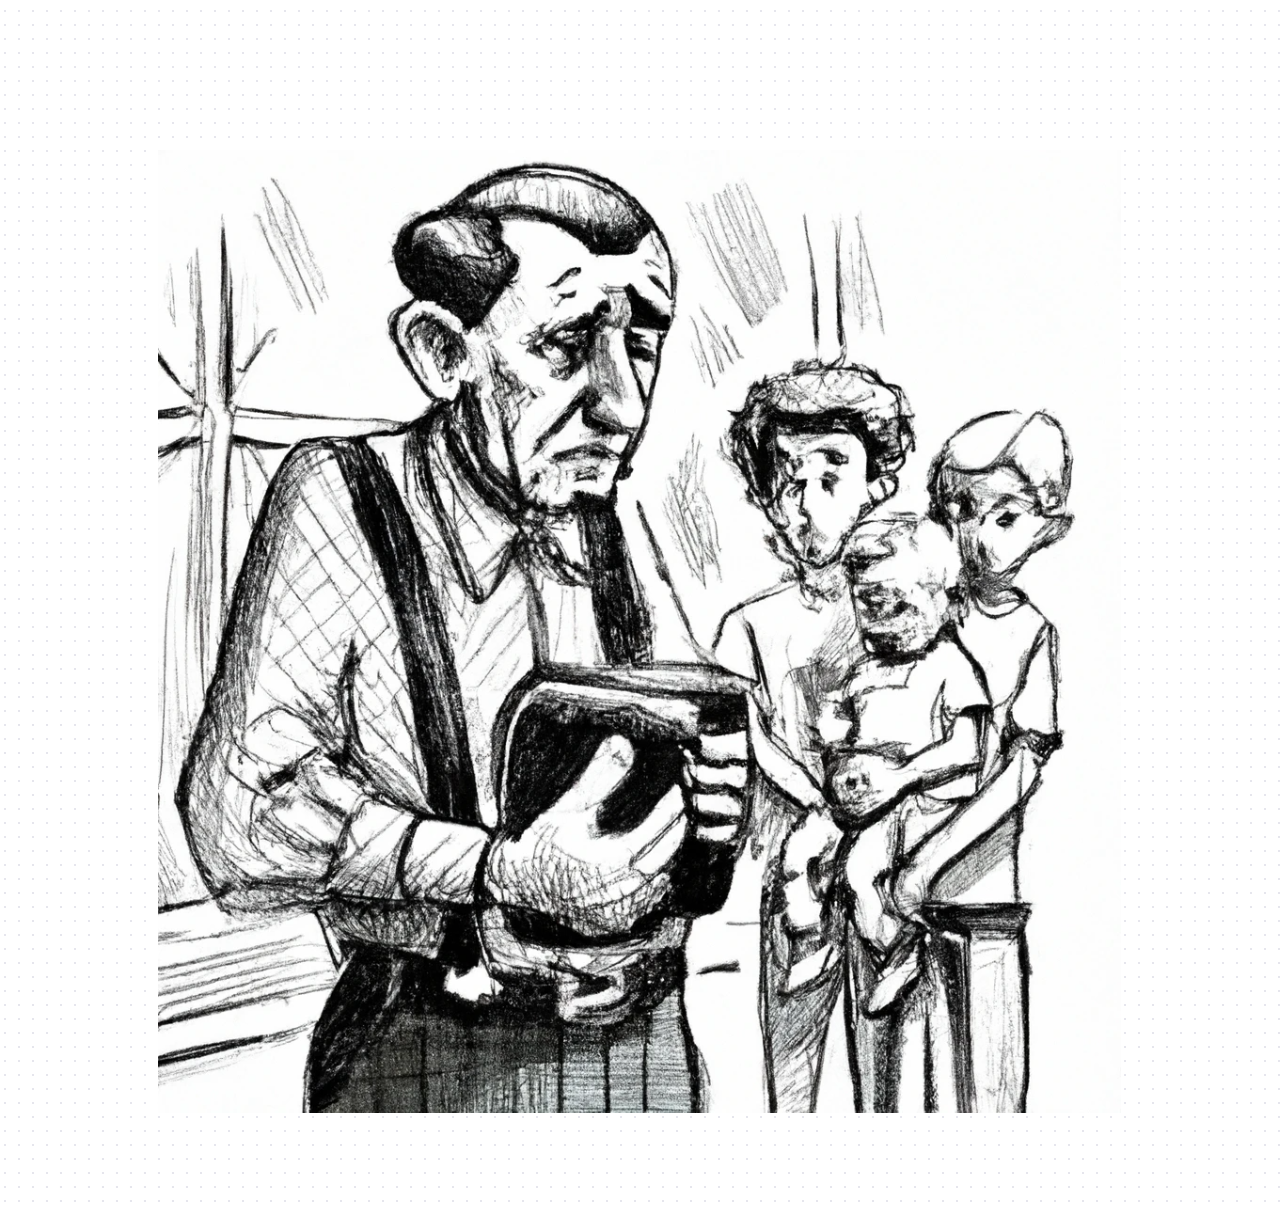 Dall-e2 Query: hatching style, sad family, nervous old dad with pocket book